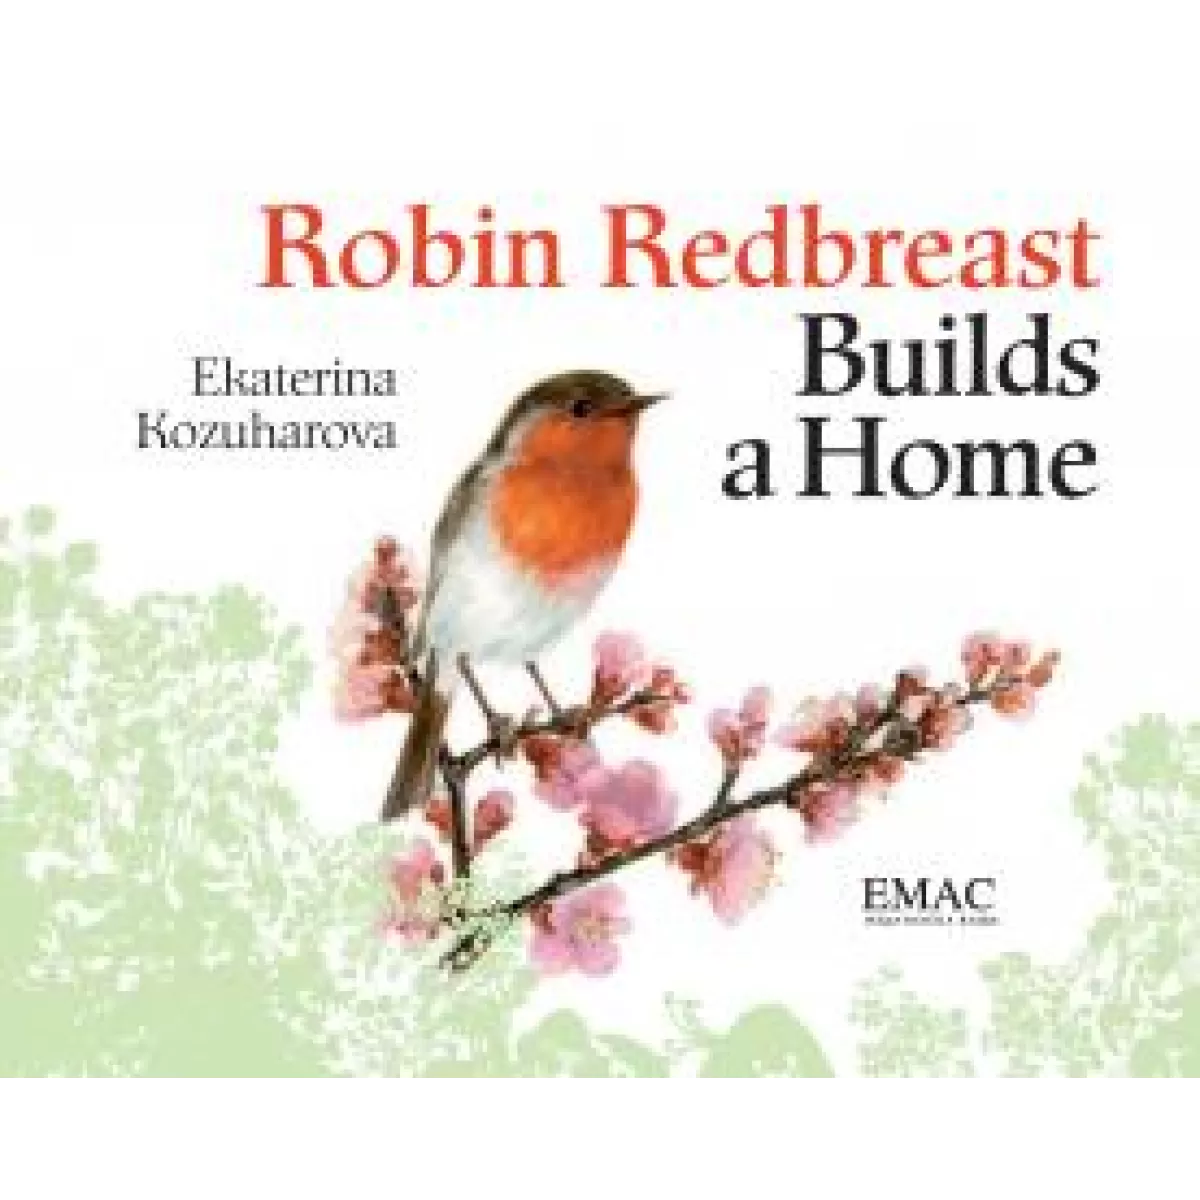 Robin redbreast builds a home